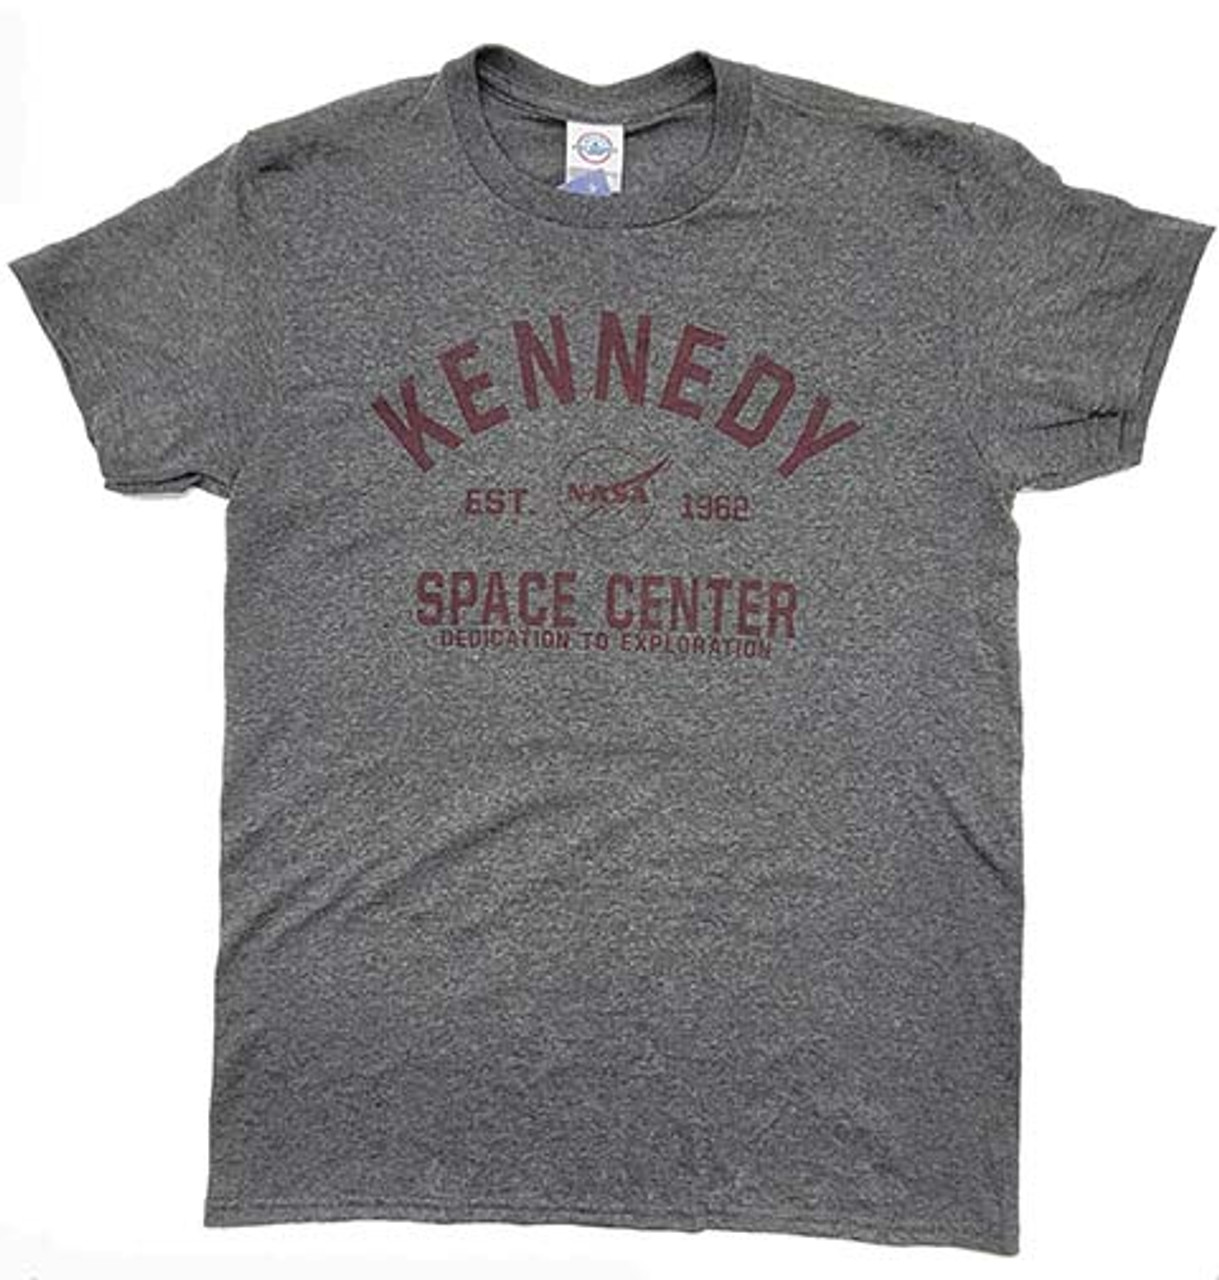 Kennedy Space Center Est. 1962 Tee - Charcoal